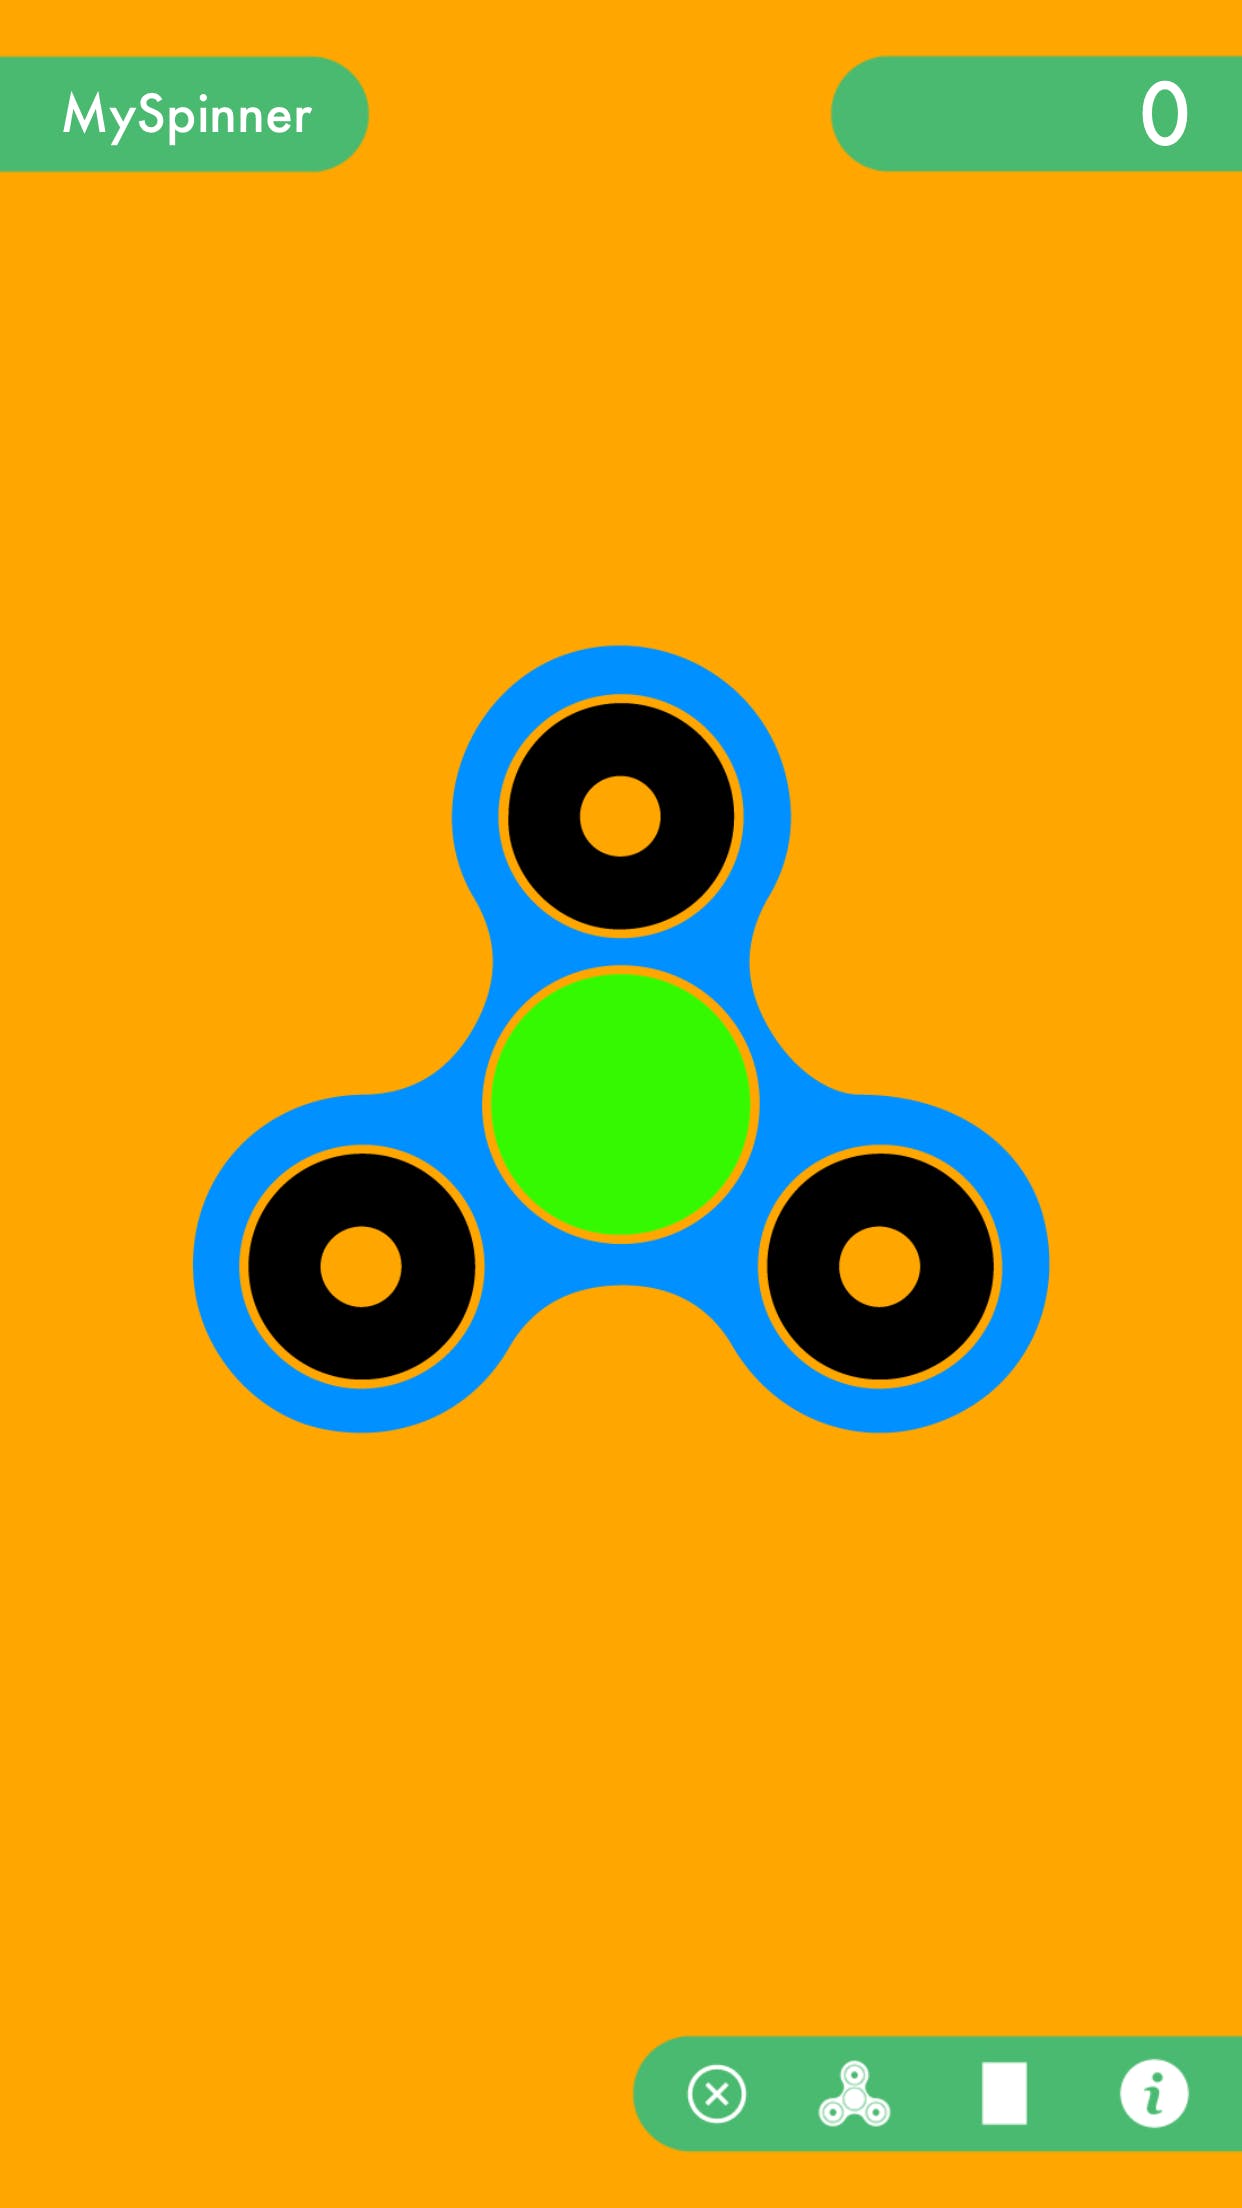 MySpinner - Controlled by phone's accelerometer media 1